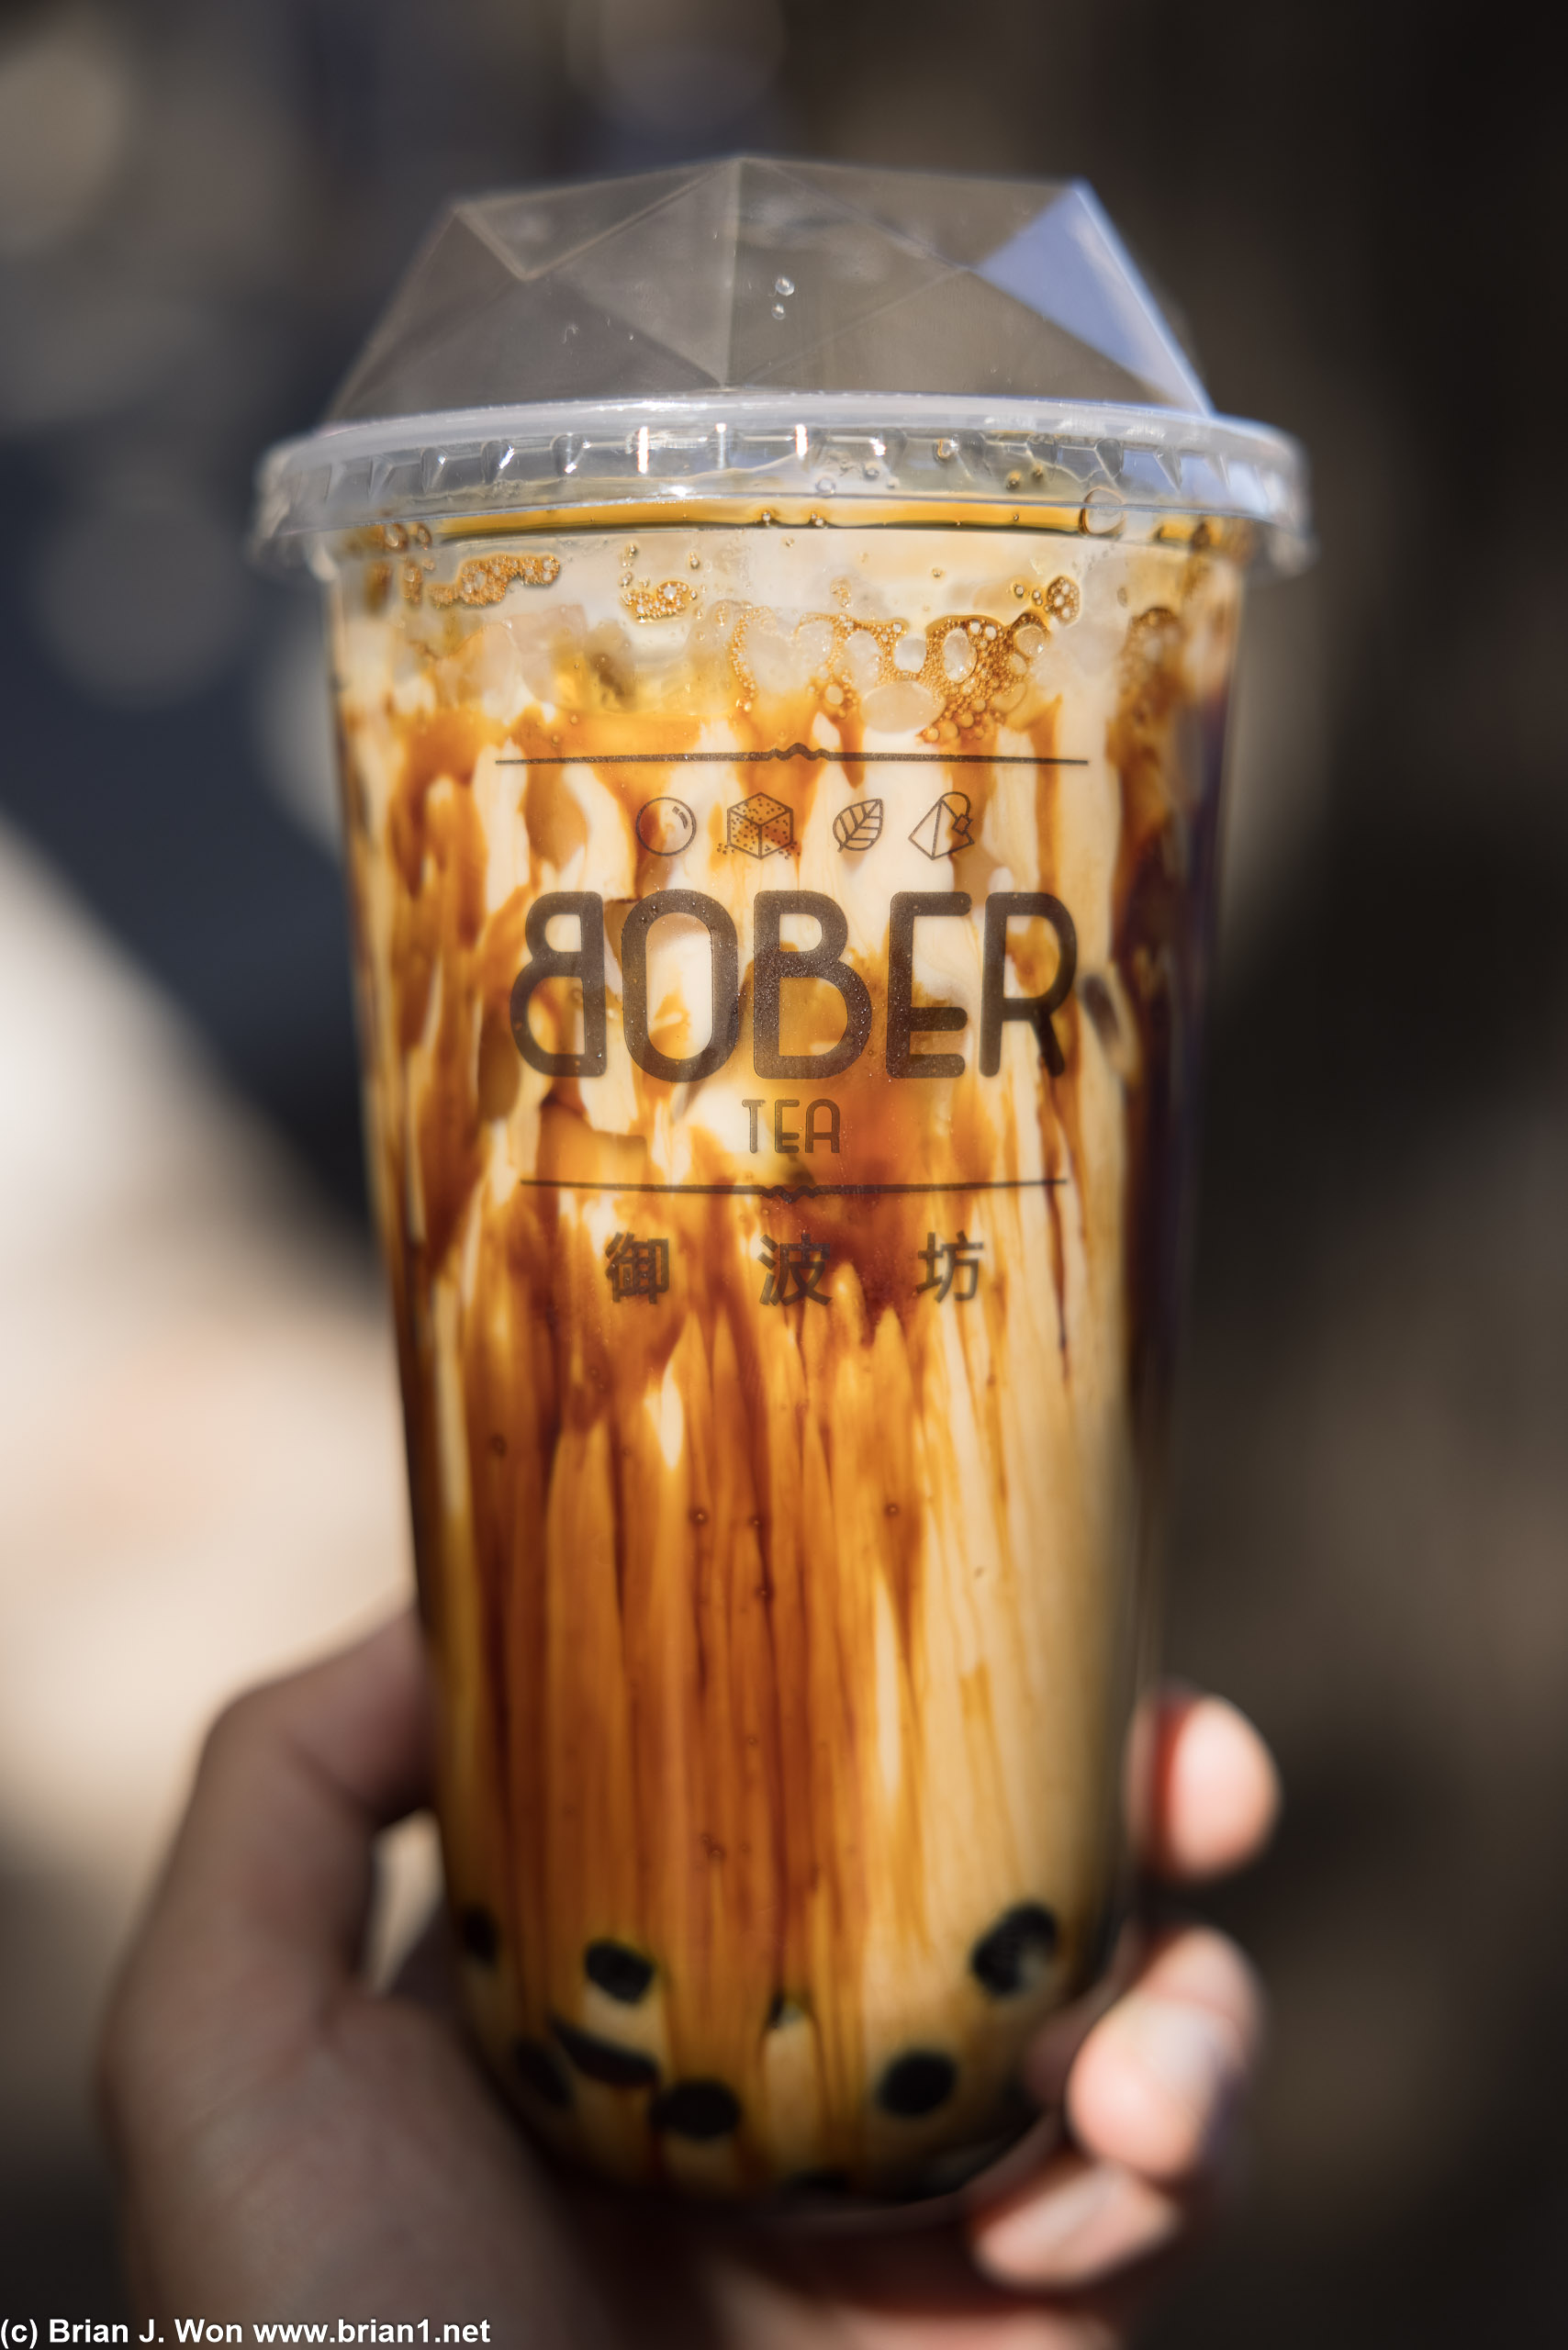 Brown sugar boba, 0% sweet, with brown sugar added-- just the right sweetness.